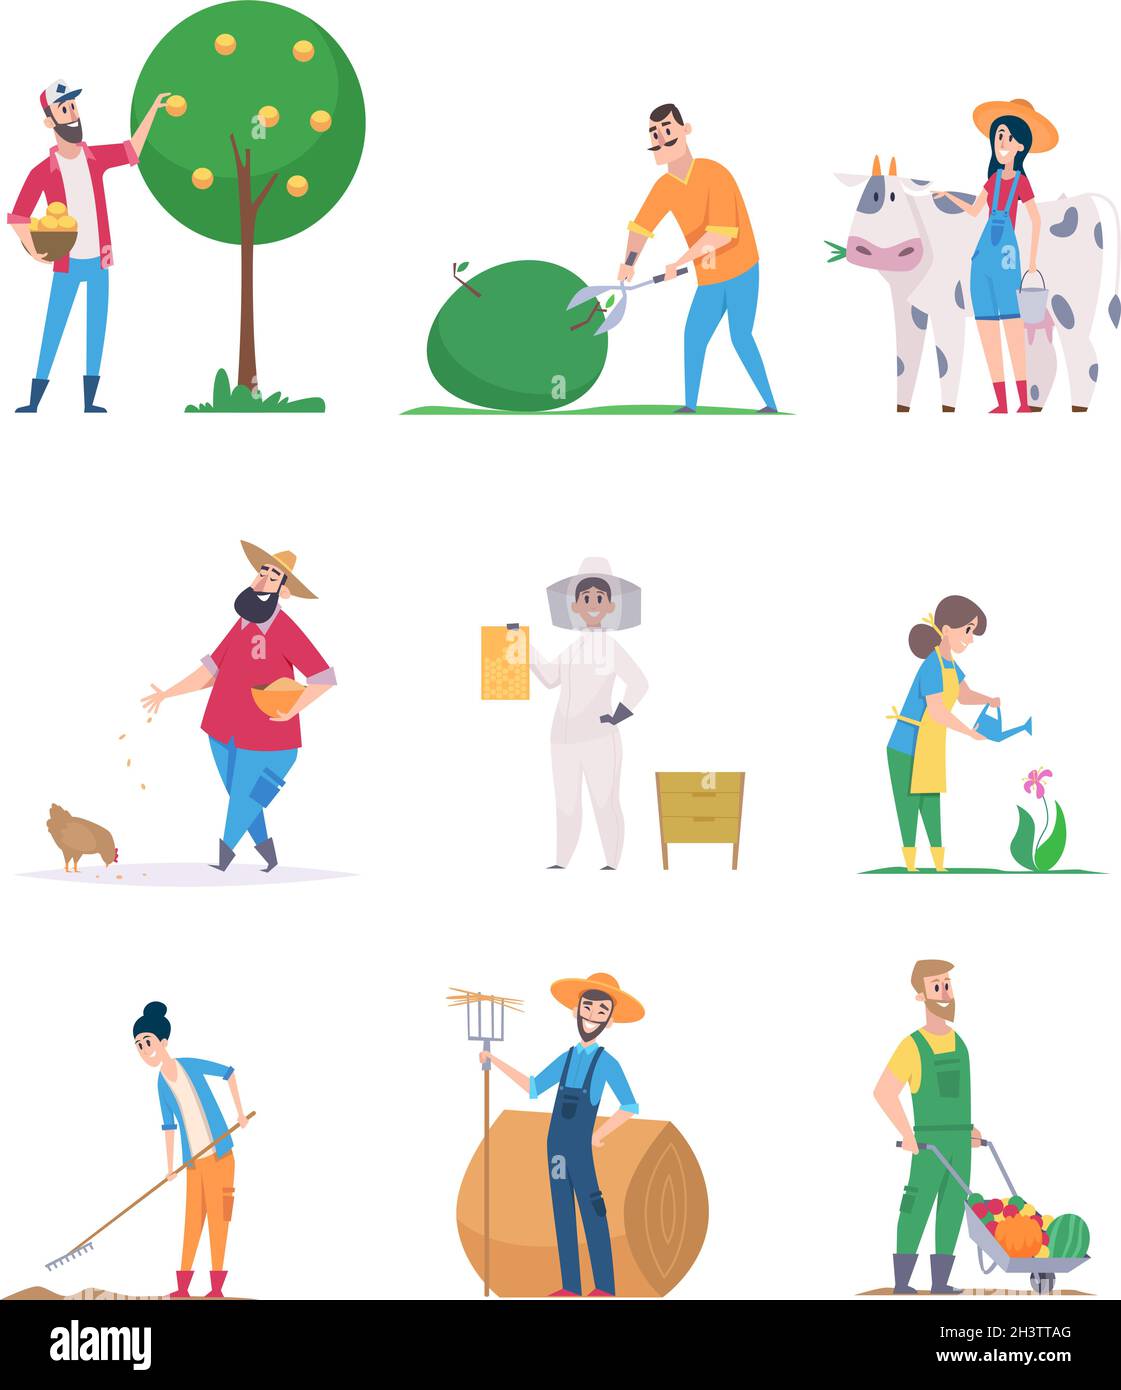 Gardeners and farmers. Happy characters growth vegetables agriculture workers vector cartoon people Stock Vector